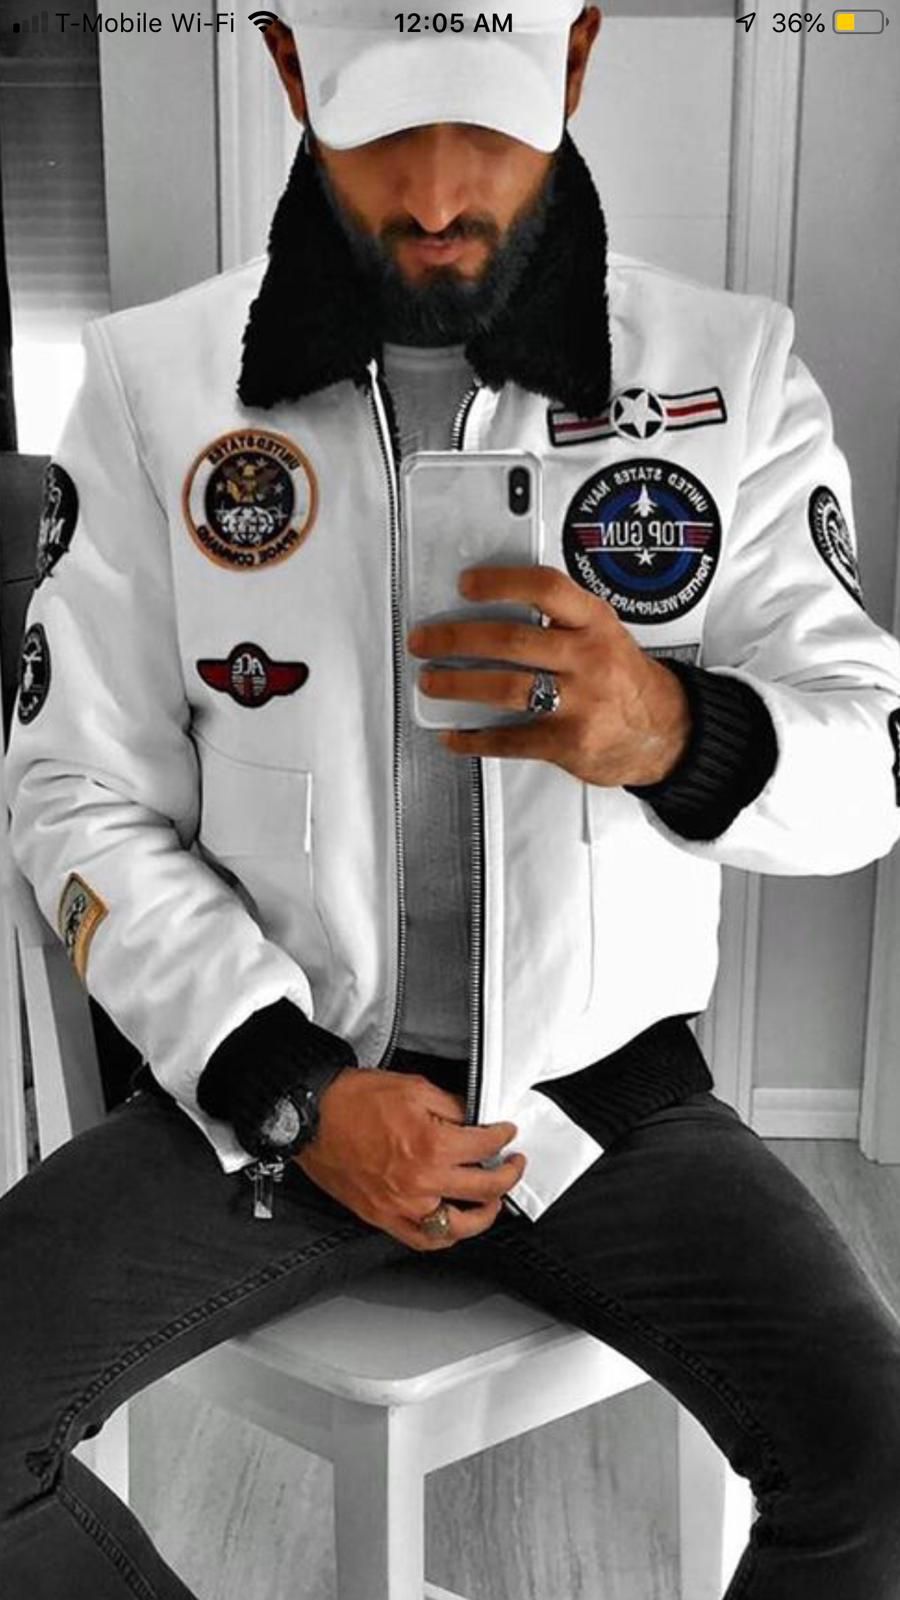 Men’s white fashion bomber euro jacket all sizes price is firm serious buyers only pls